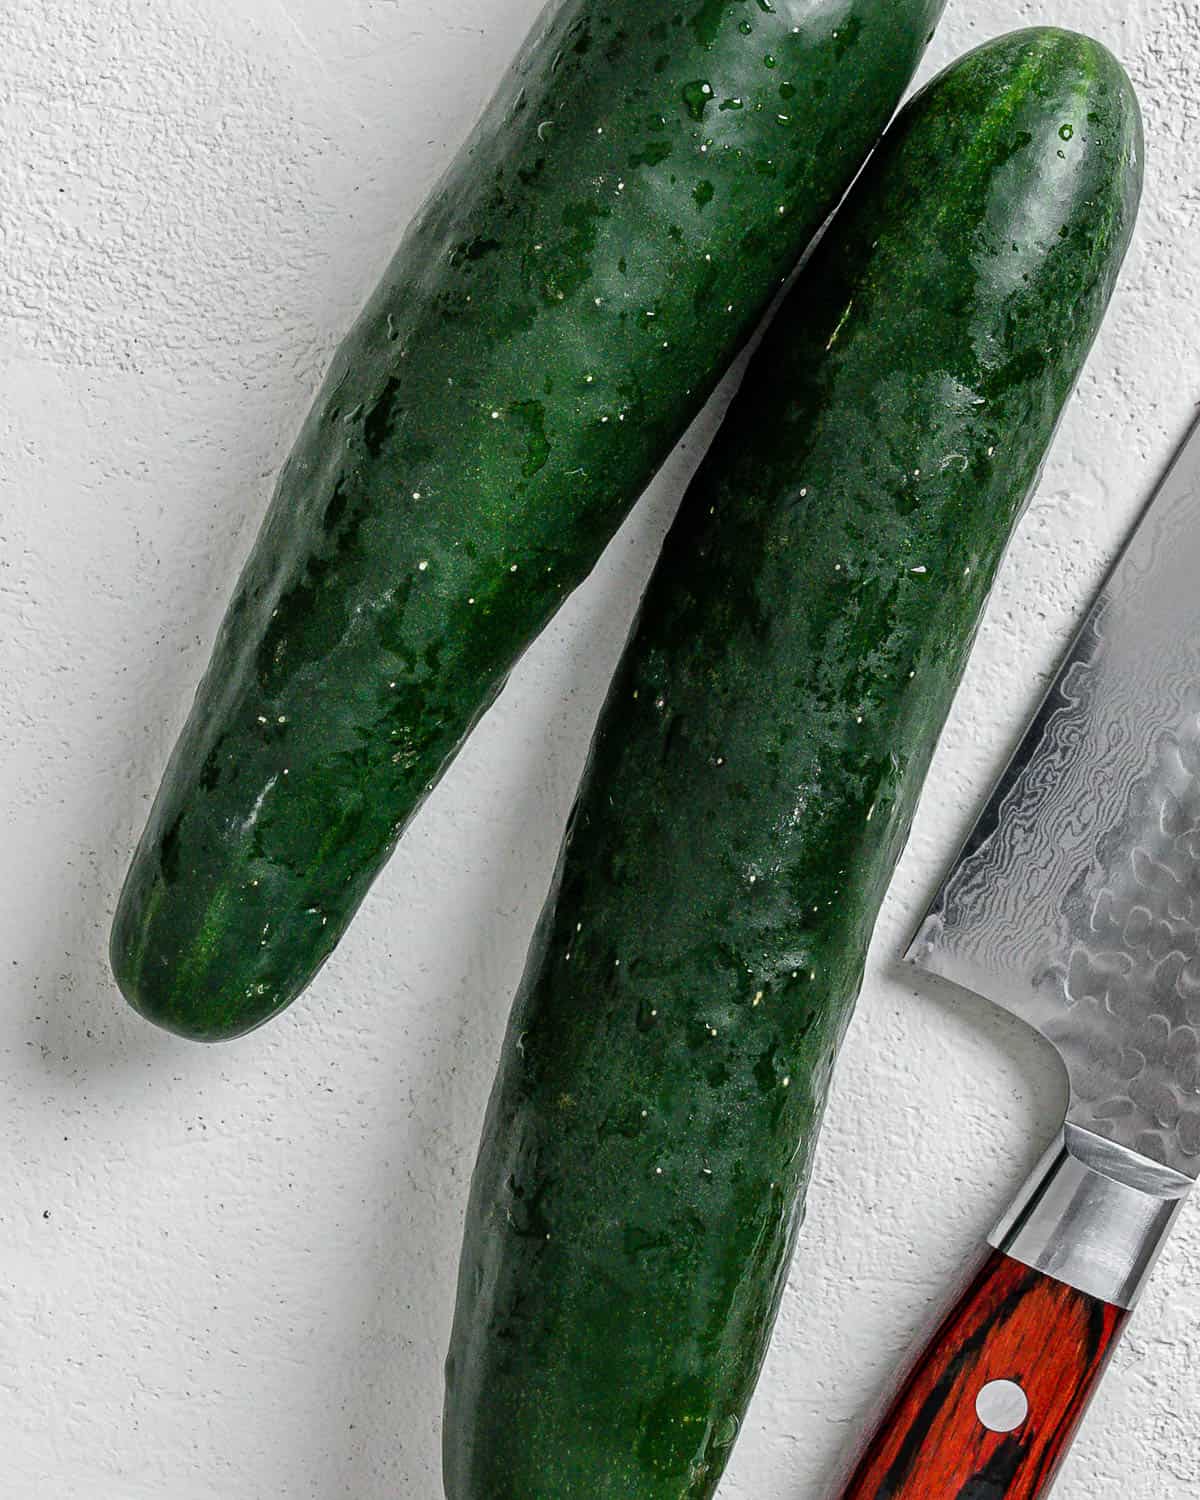 two cucumbers and a knife against a white surface